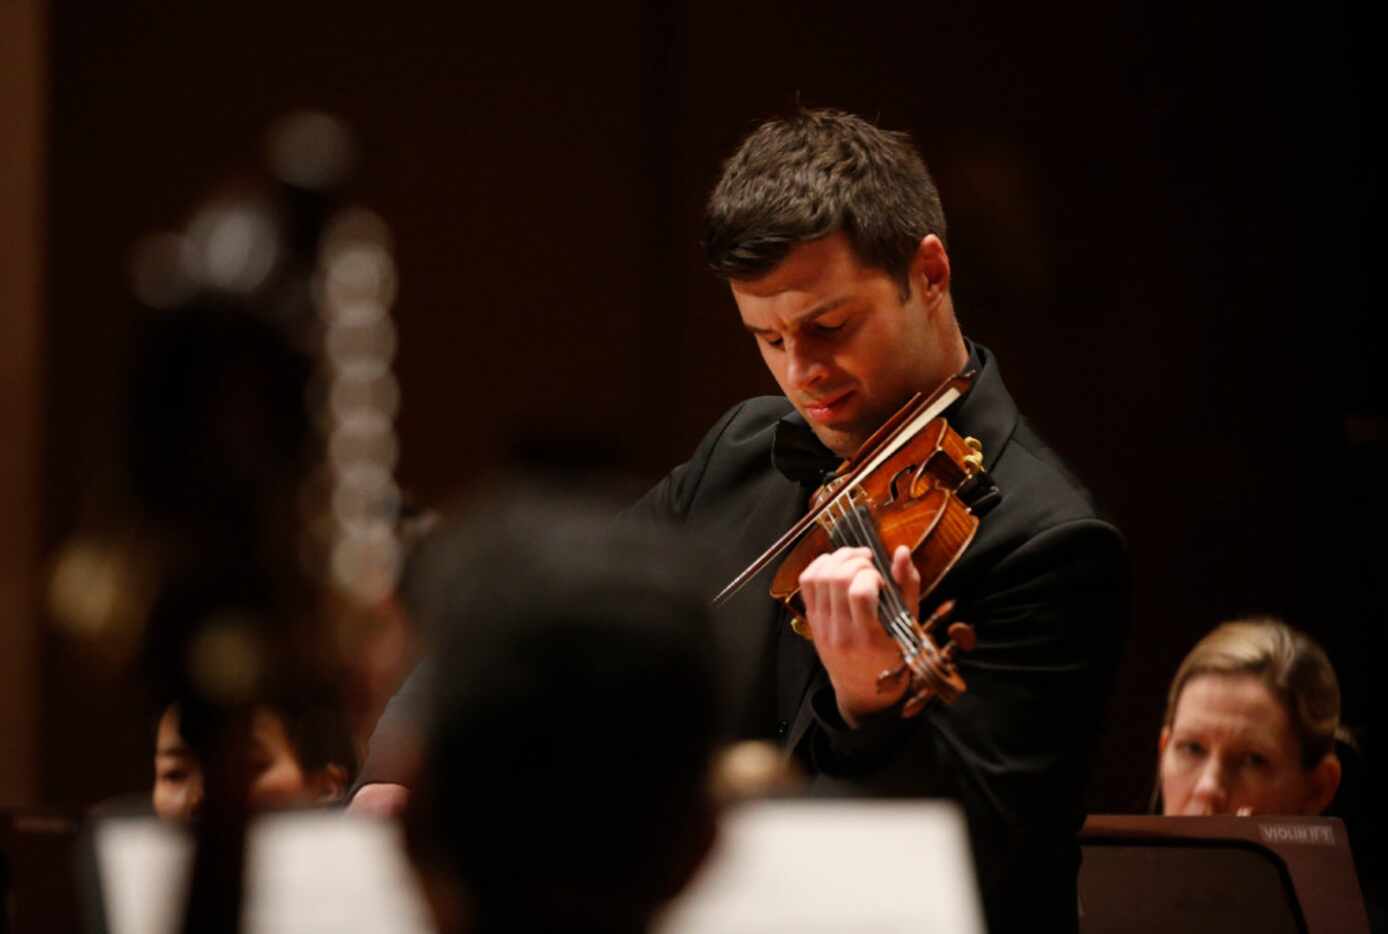 Violinist Nathan Olson performs "The Four Seasons" by Vivaldi with the Dallas Symphony...